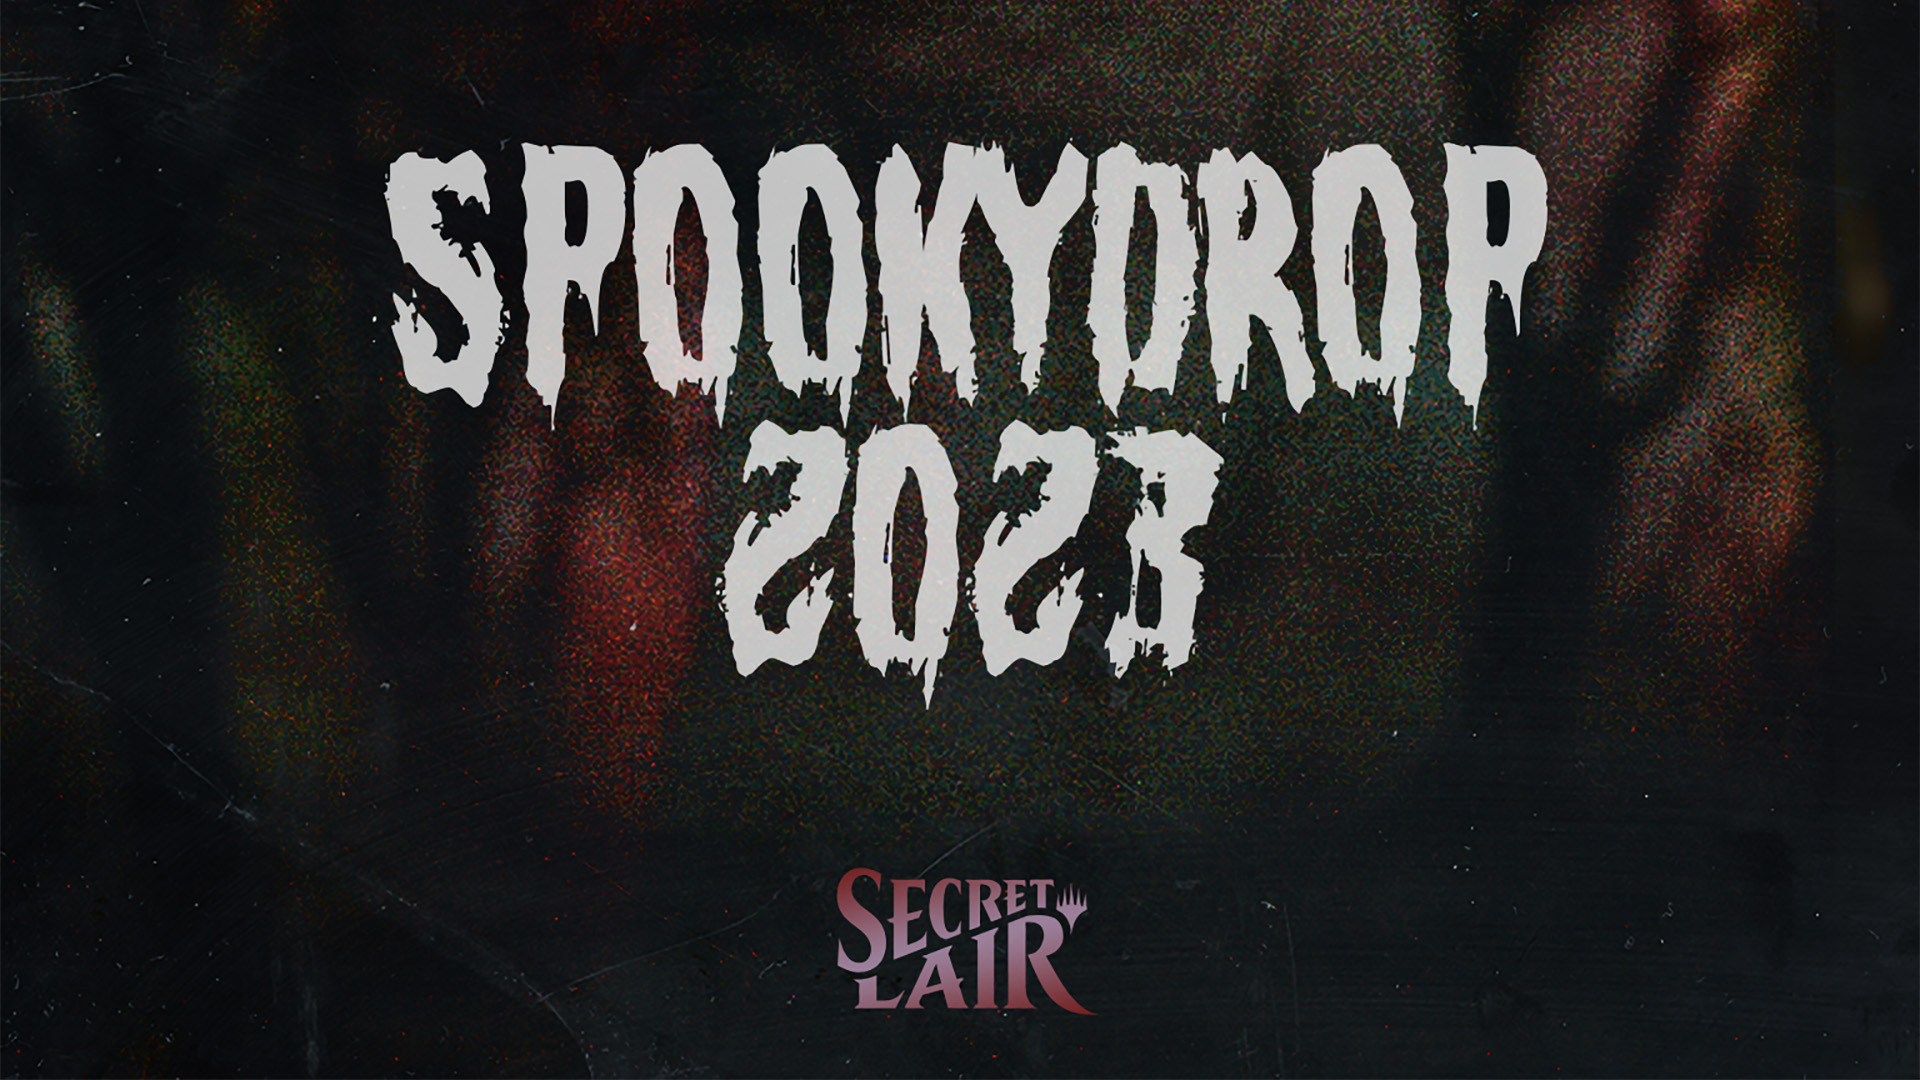 Prepare for Fright and Delight with Secret Lair's Spookydrop!